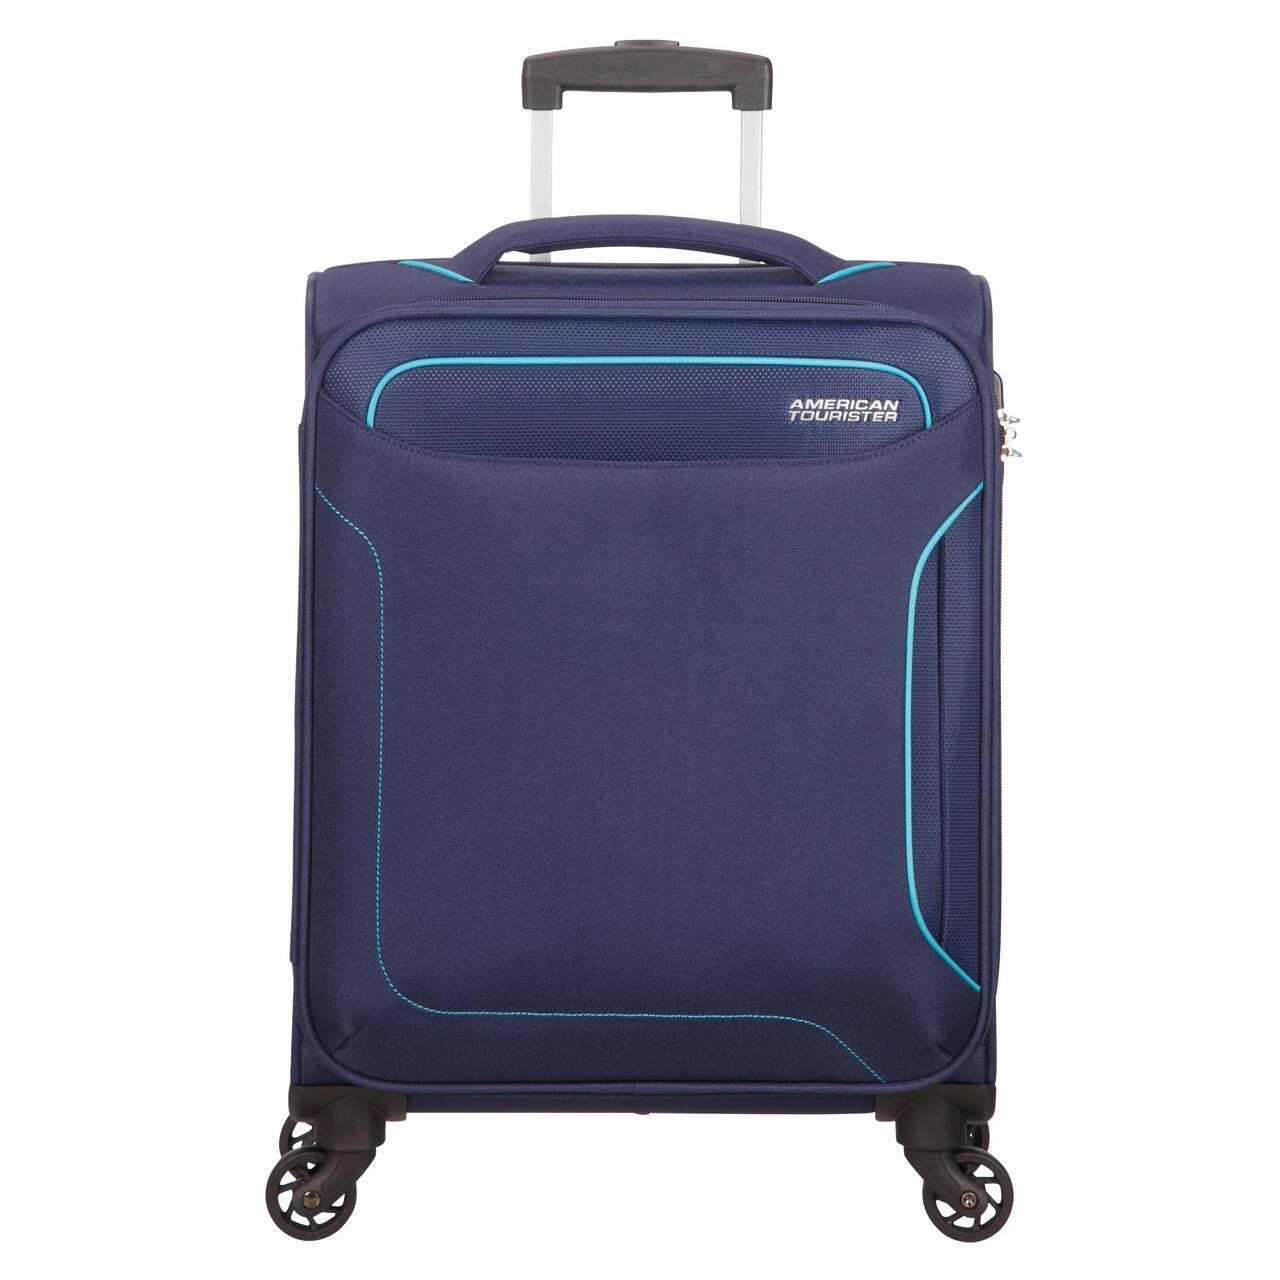 AMERICAN TOURISTER Holiday Heat 4 Wheel Cabin Suitcase - 55cm - Navy